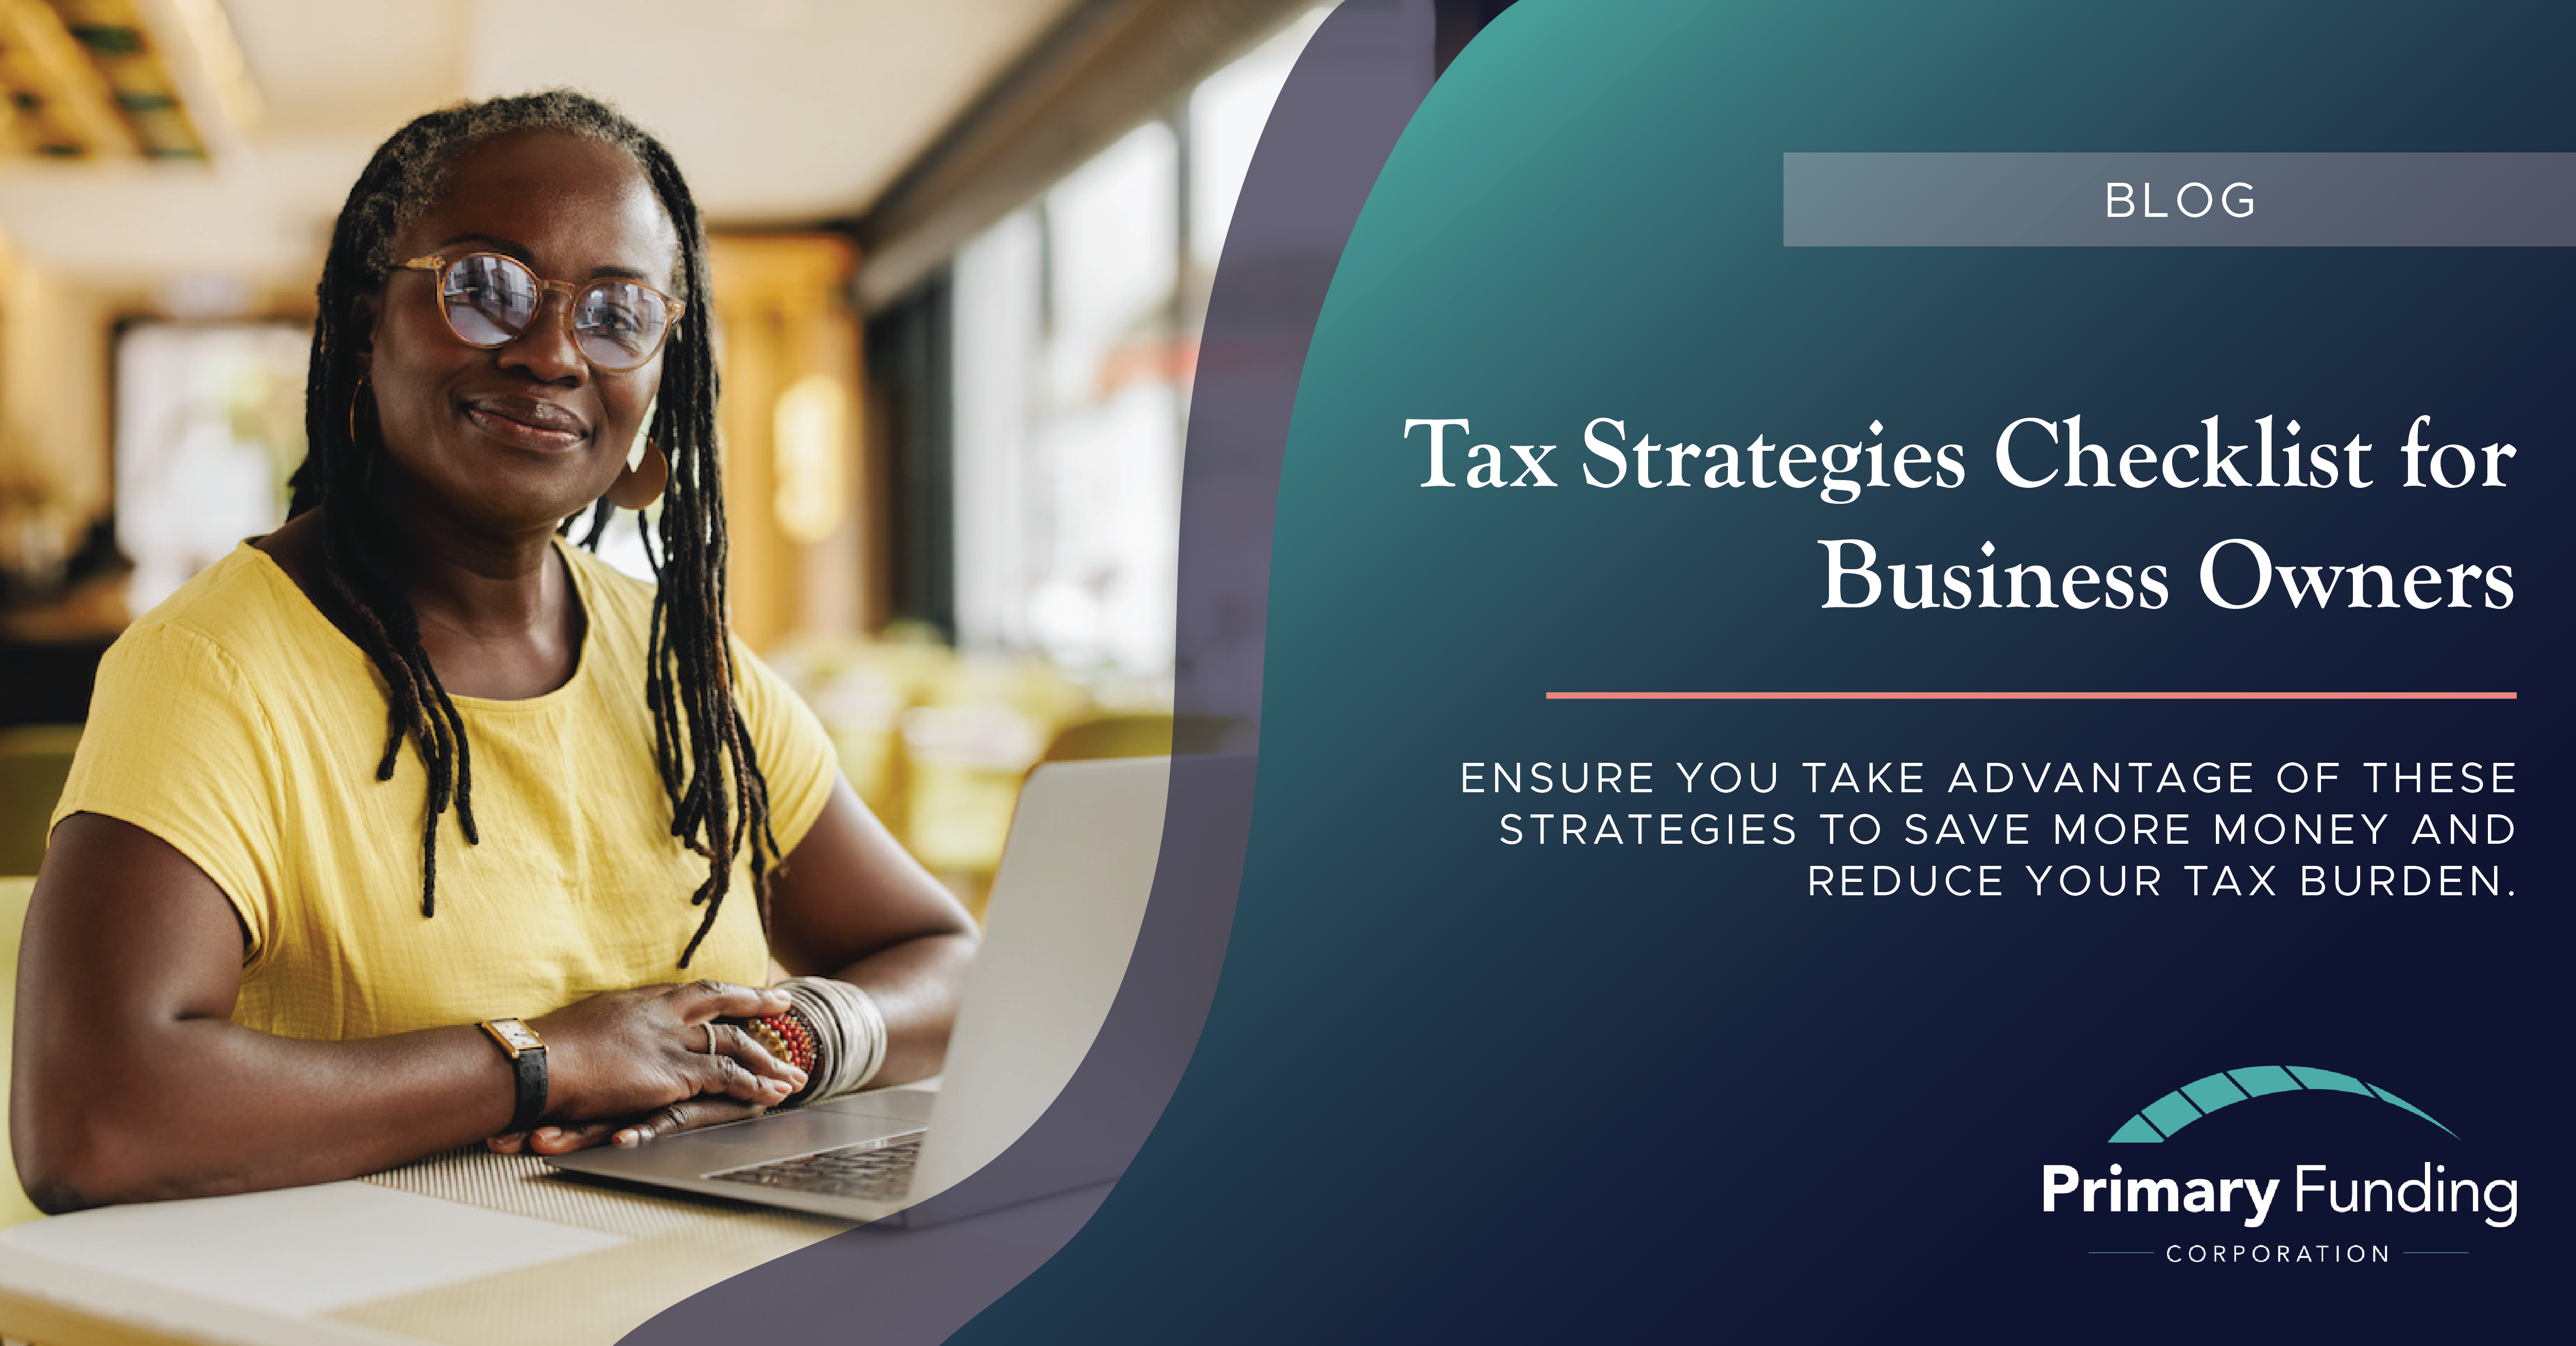 Tax Strategies For Business Owners Checklist V2 New Employee